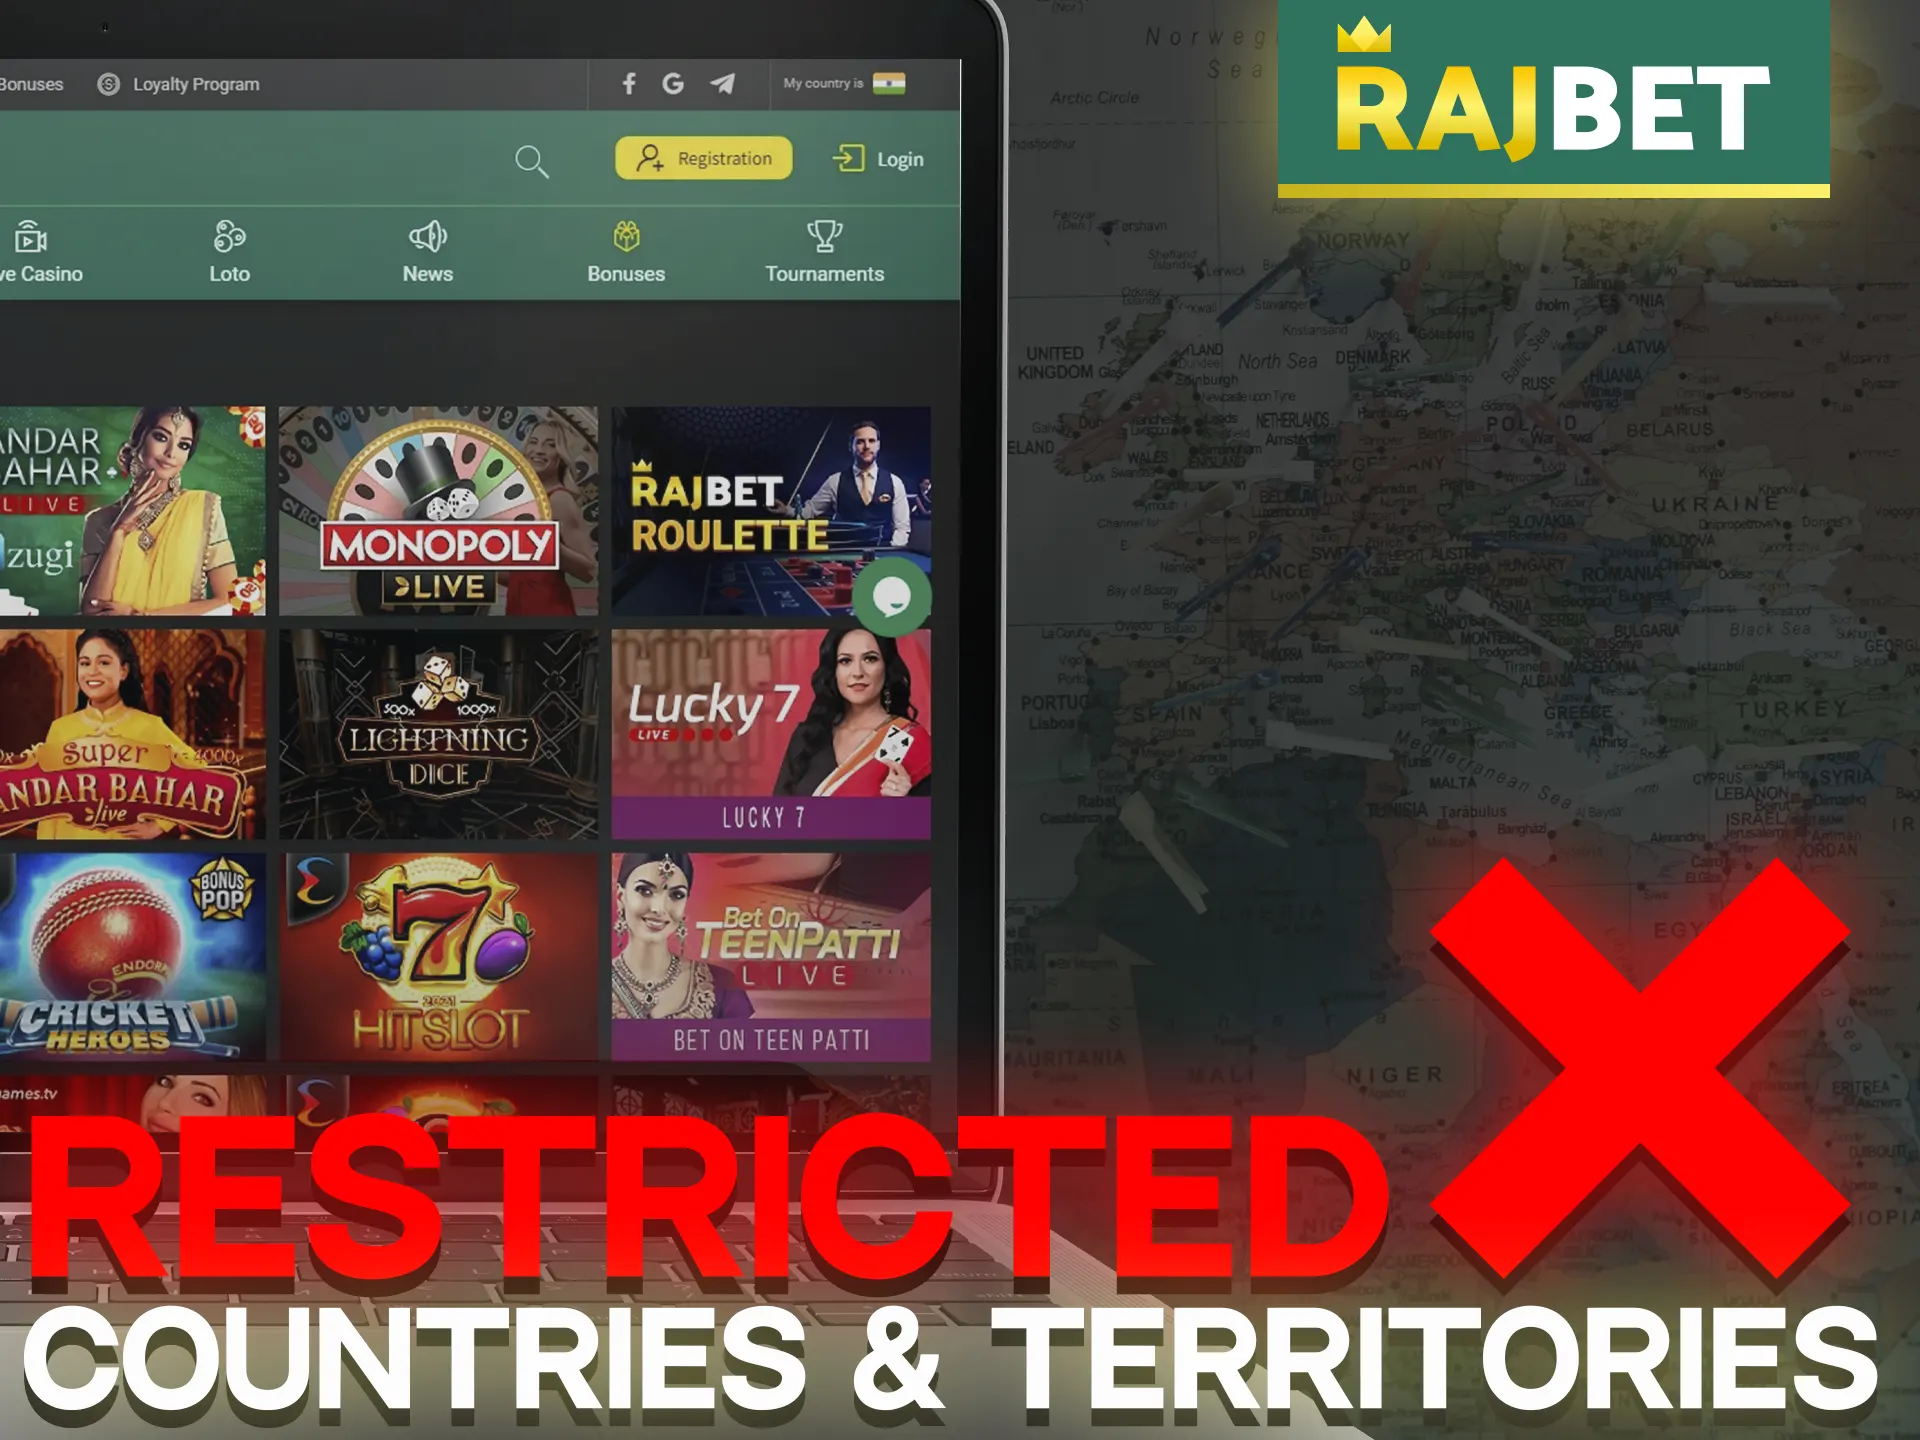 Internet gambling is prohibited in many countries, players from these nations are unable to access the Rajbet online casino.